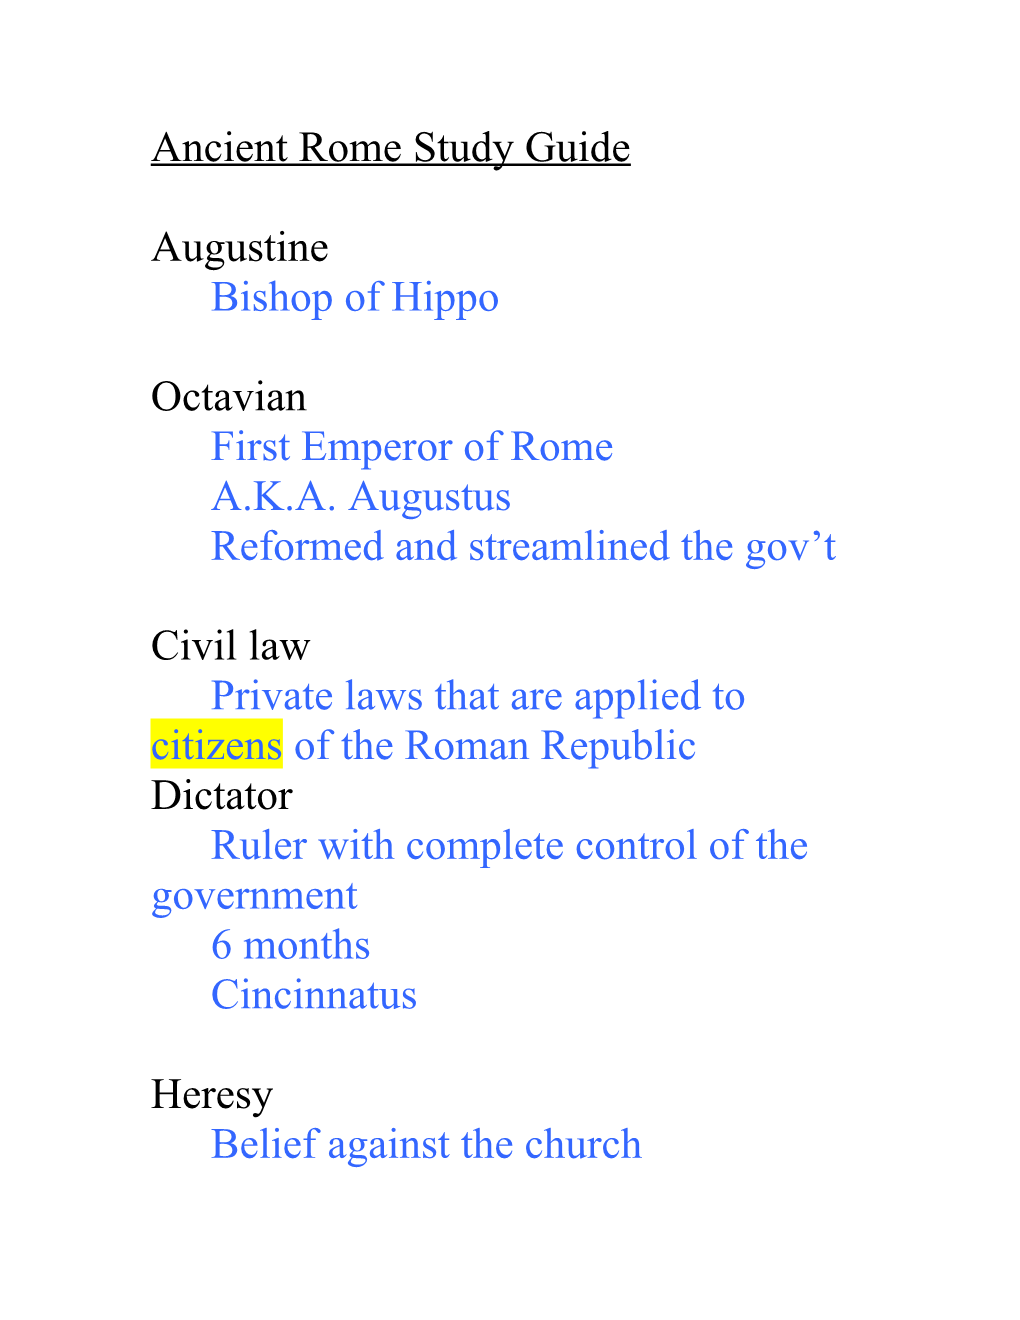 Ancient Rome Study Guide s1